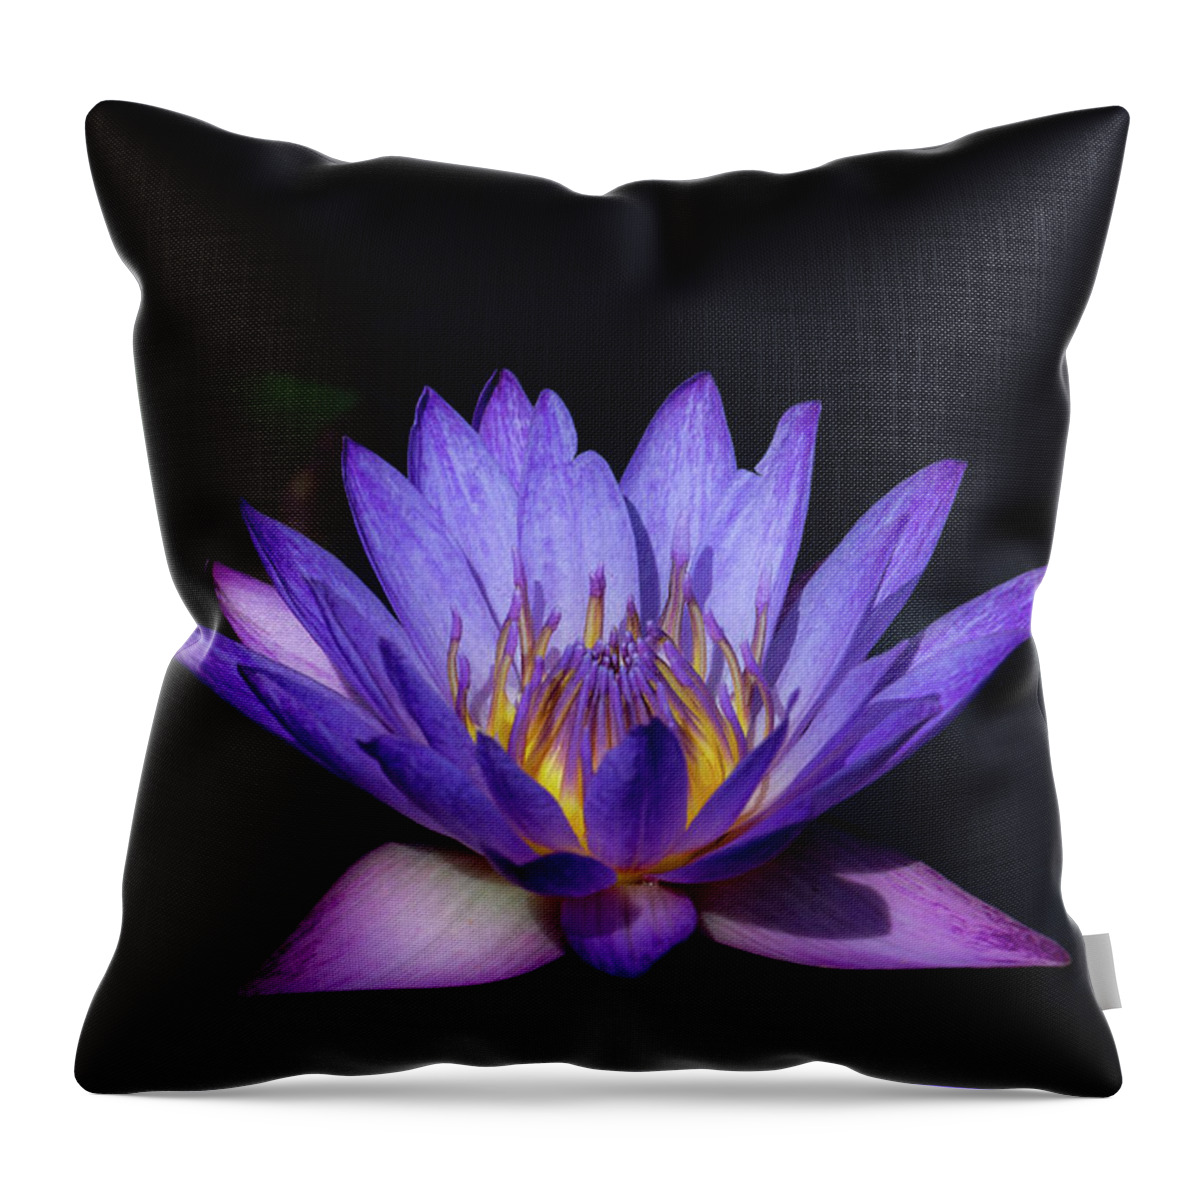 Flower Throw Pillow featuring the photograph Blue Water Lily by Andrea Silies